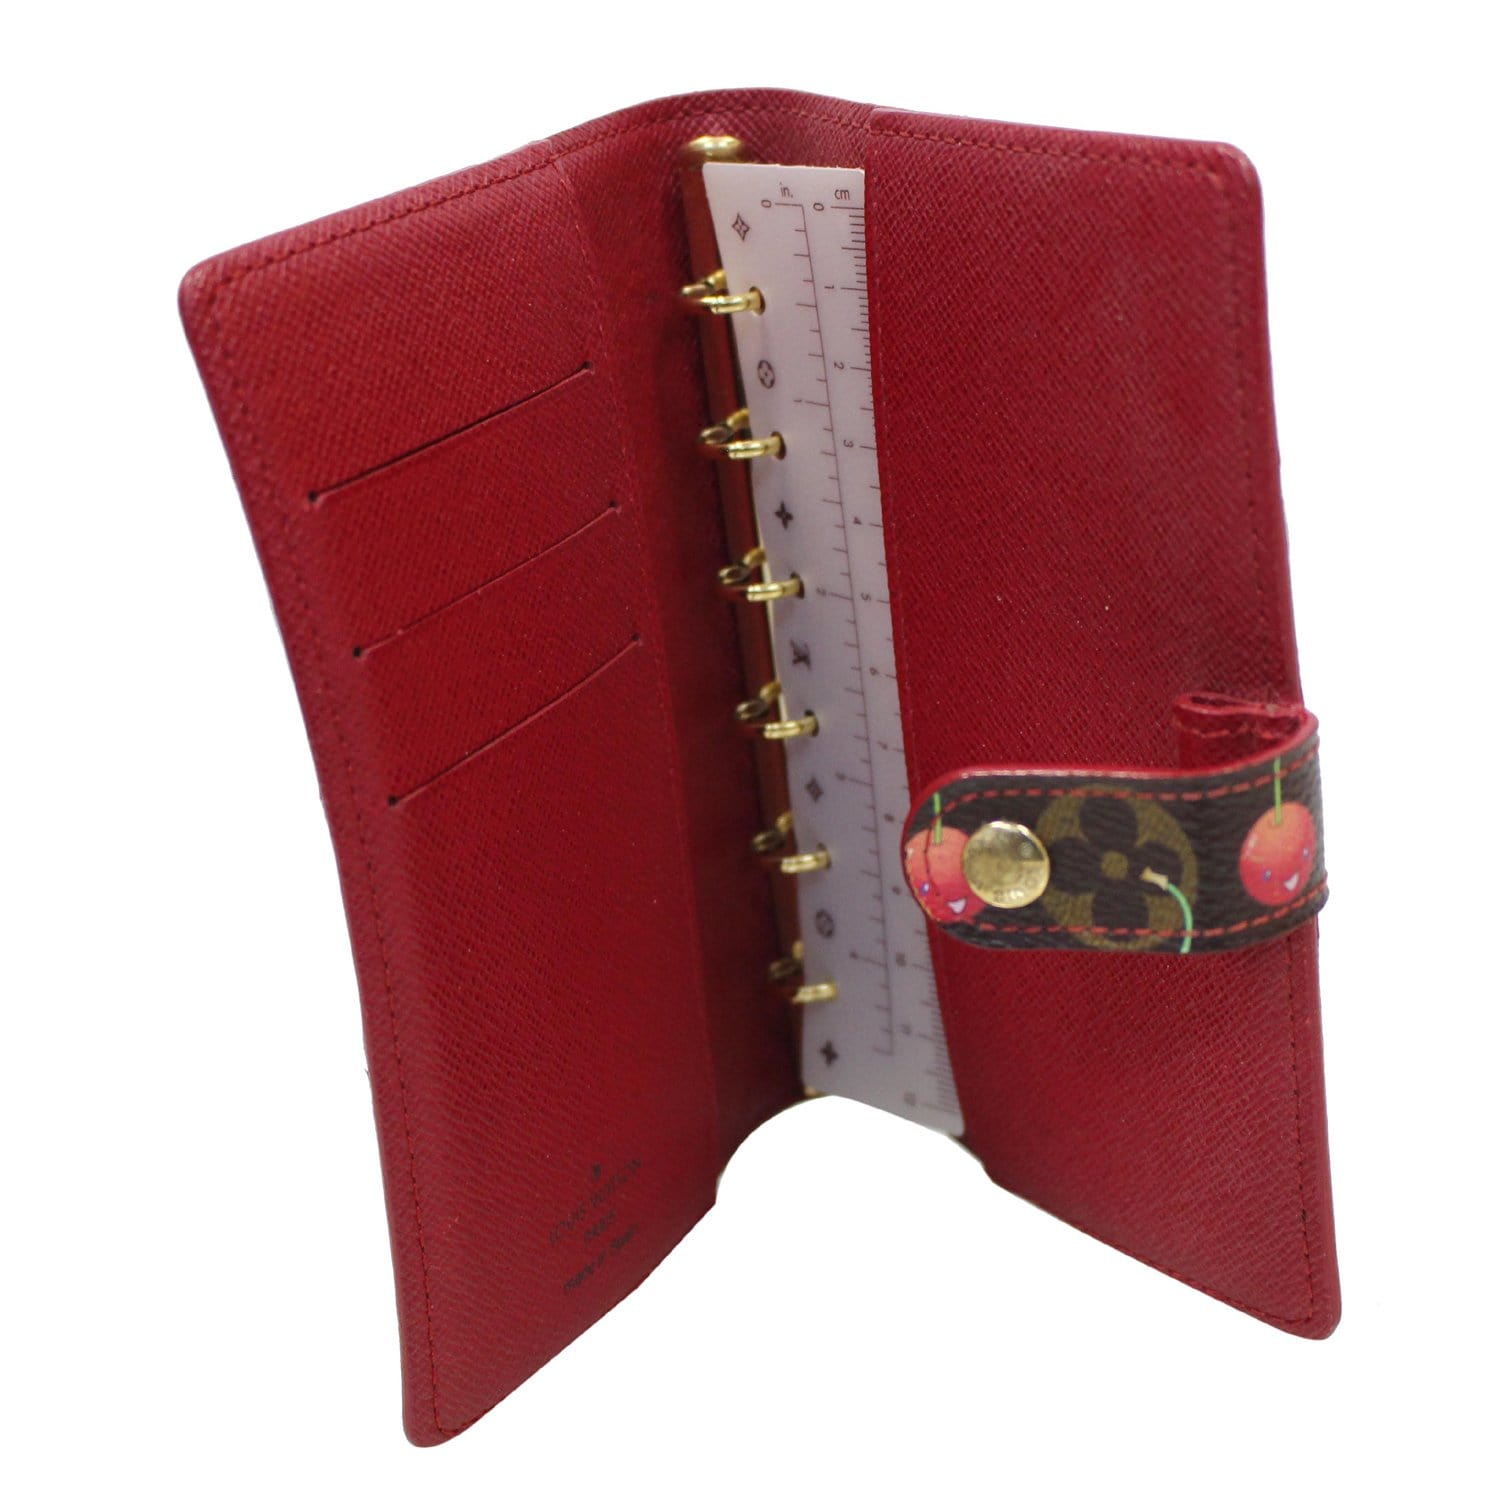 Louis Vuitton Cerises Small Notebook/Planner Cover